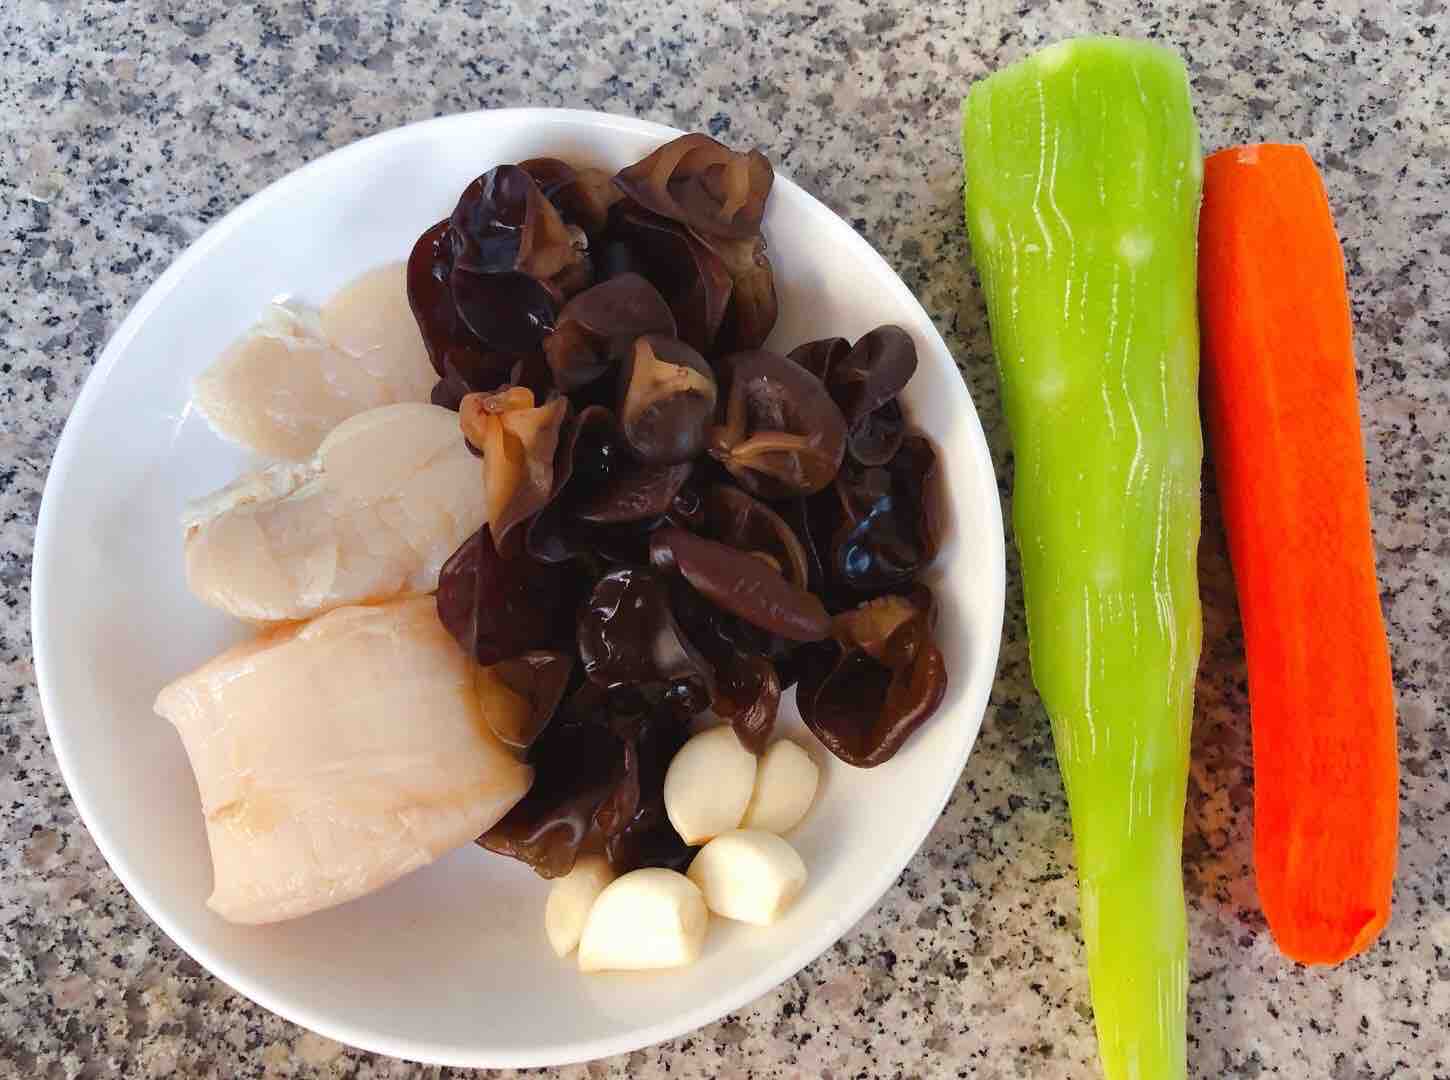 Scallops Fried Lettuce and Carrot Fungus recipe